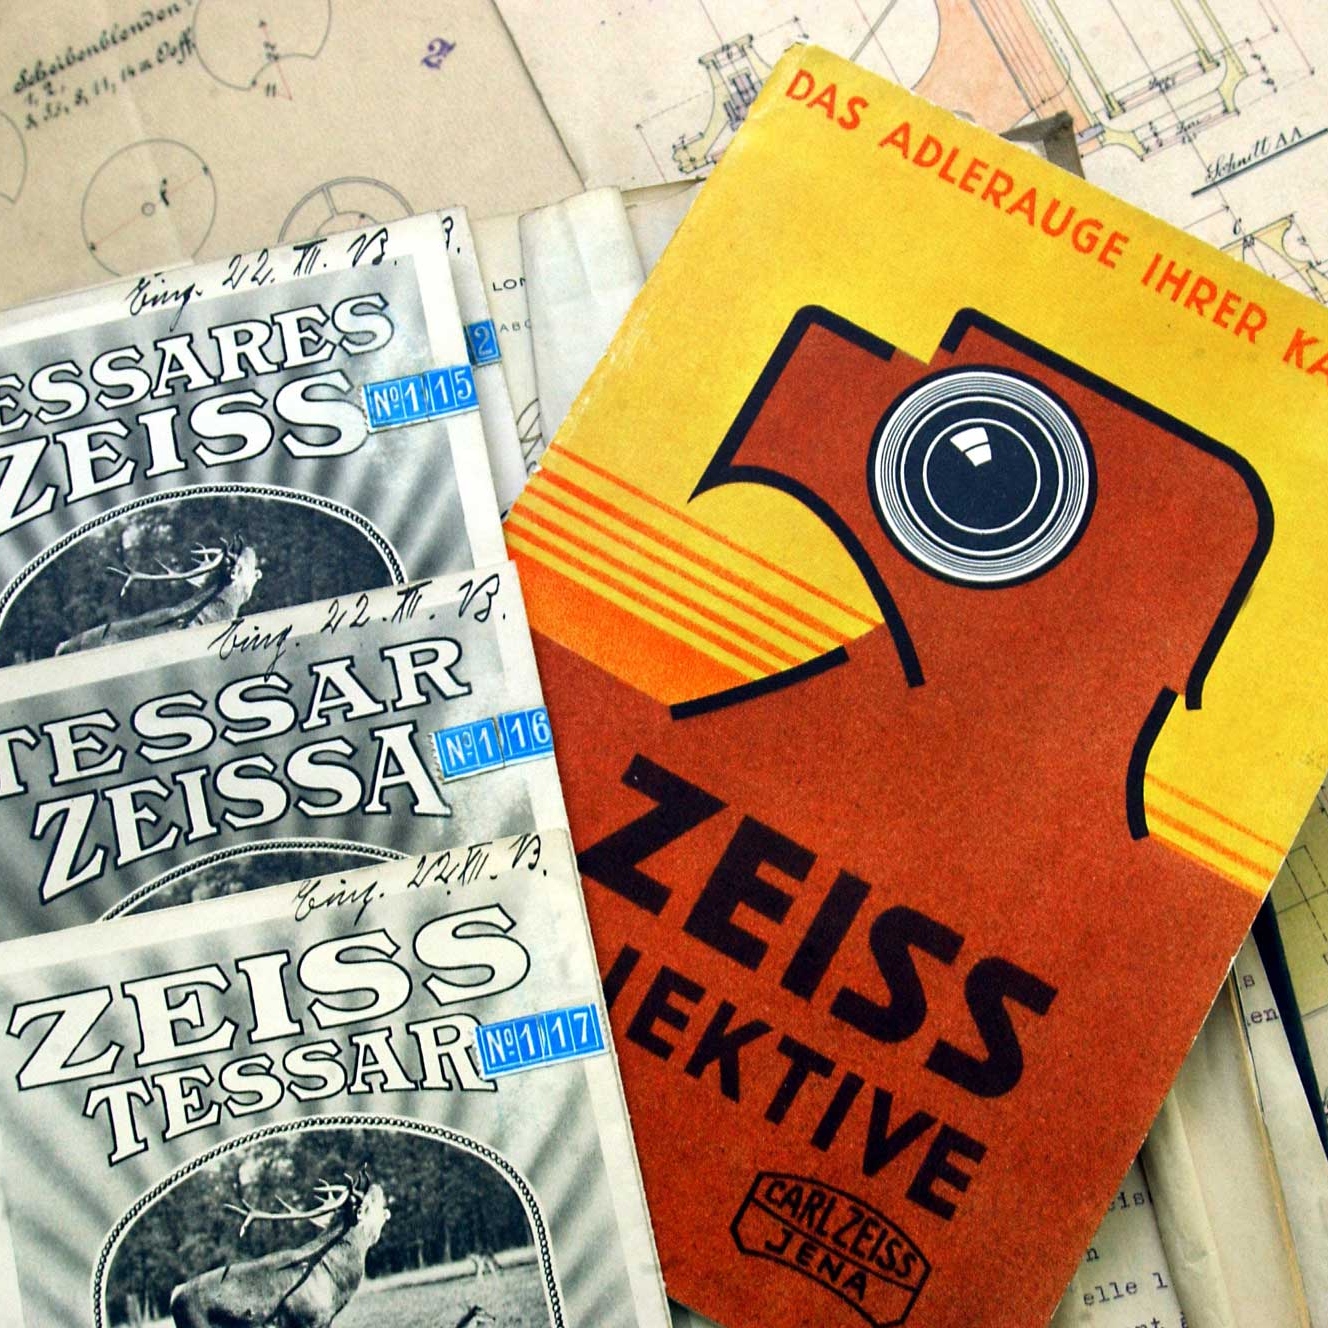 Product literature from the ZEISS Archive